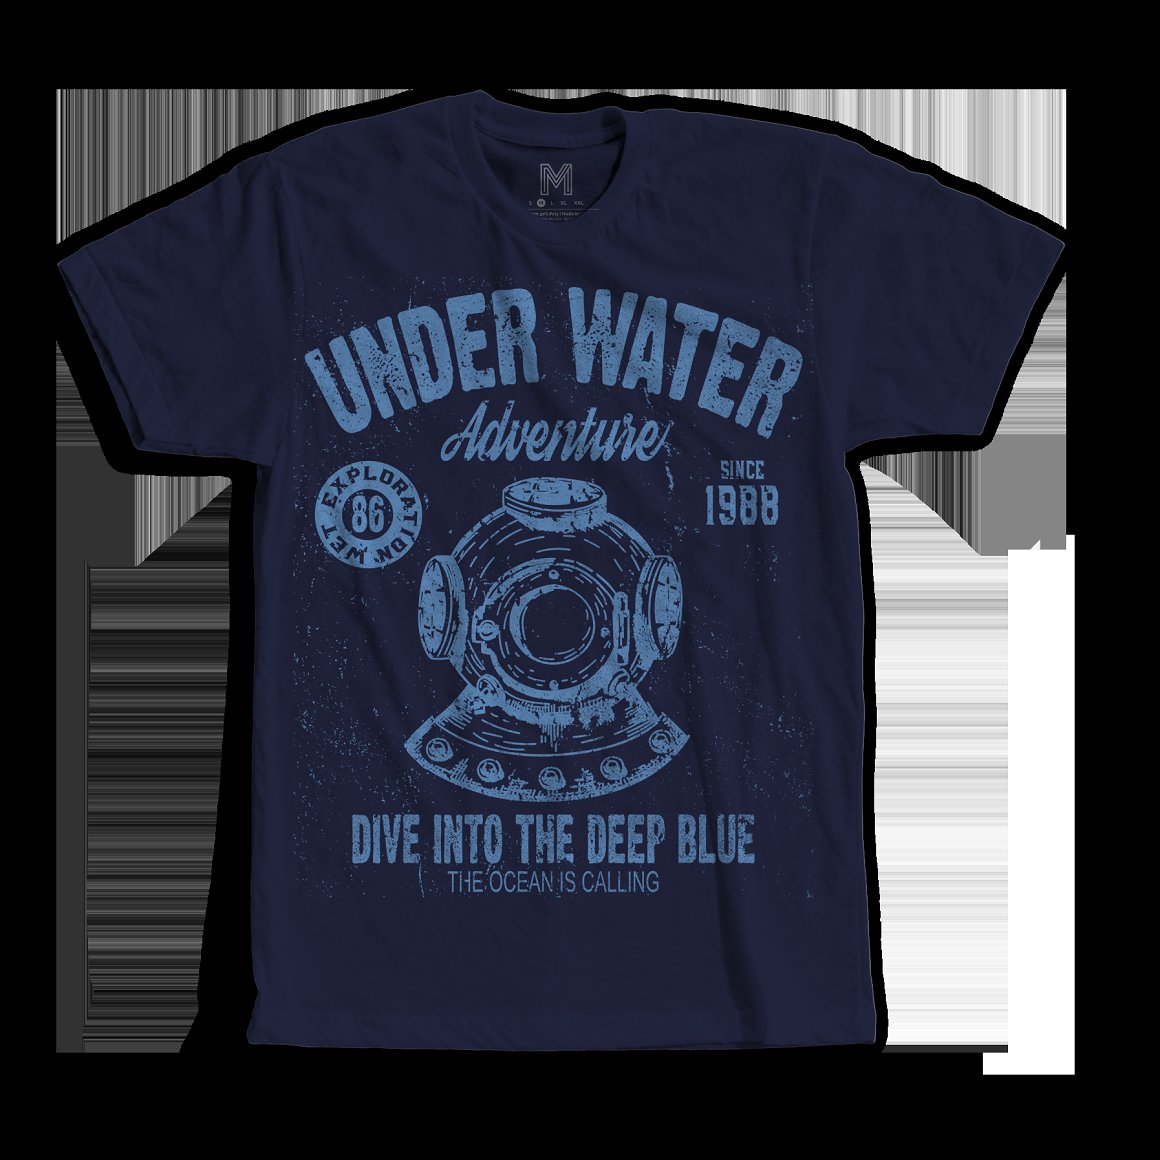 Blue image with the lettering "Under water adventure dive into the deep blue the ocean is calling" on dark blue t-shirt.